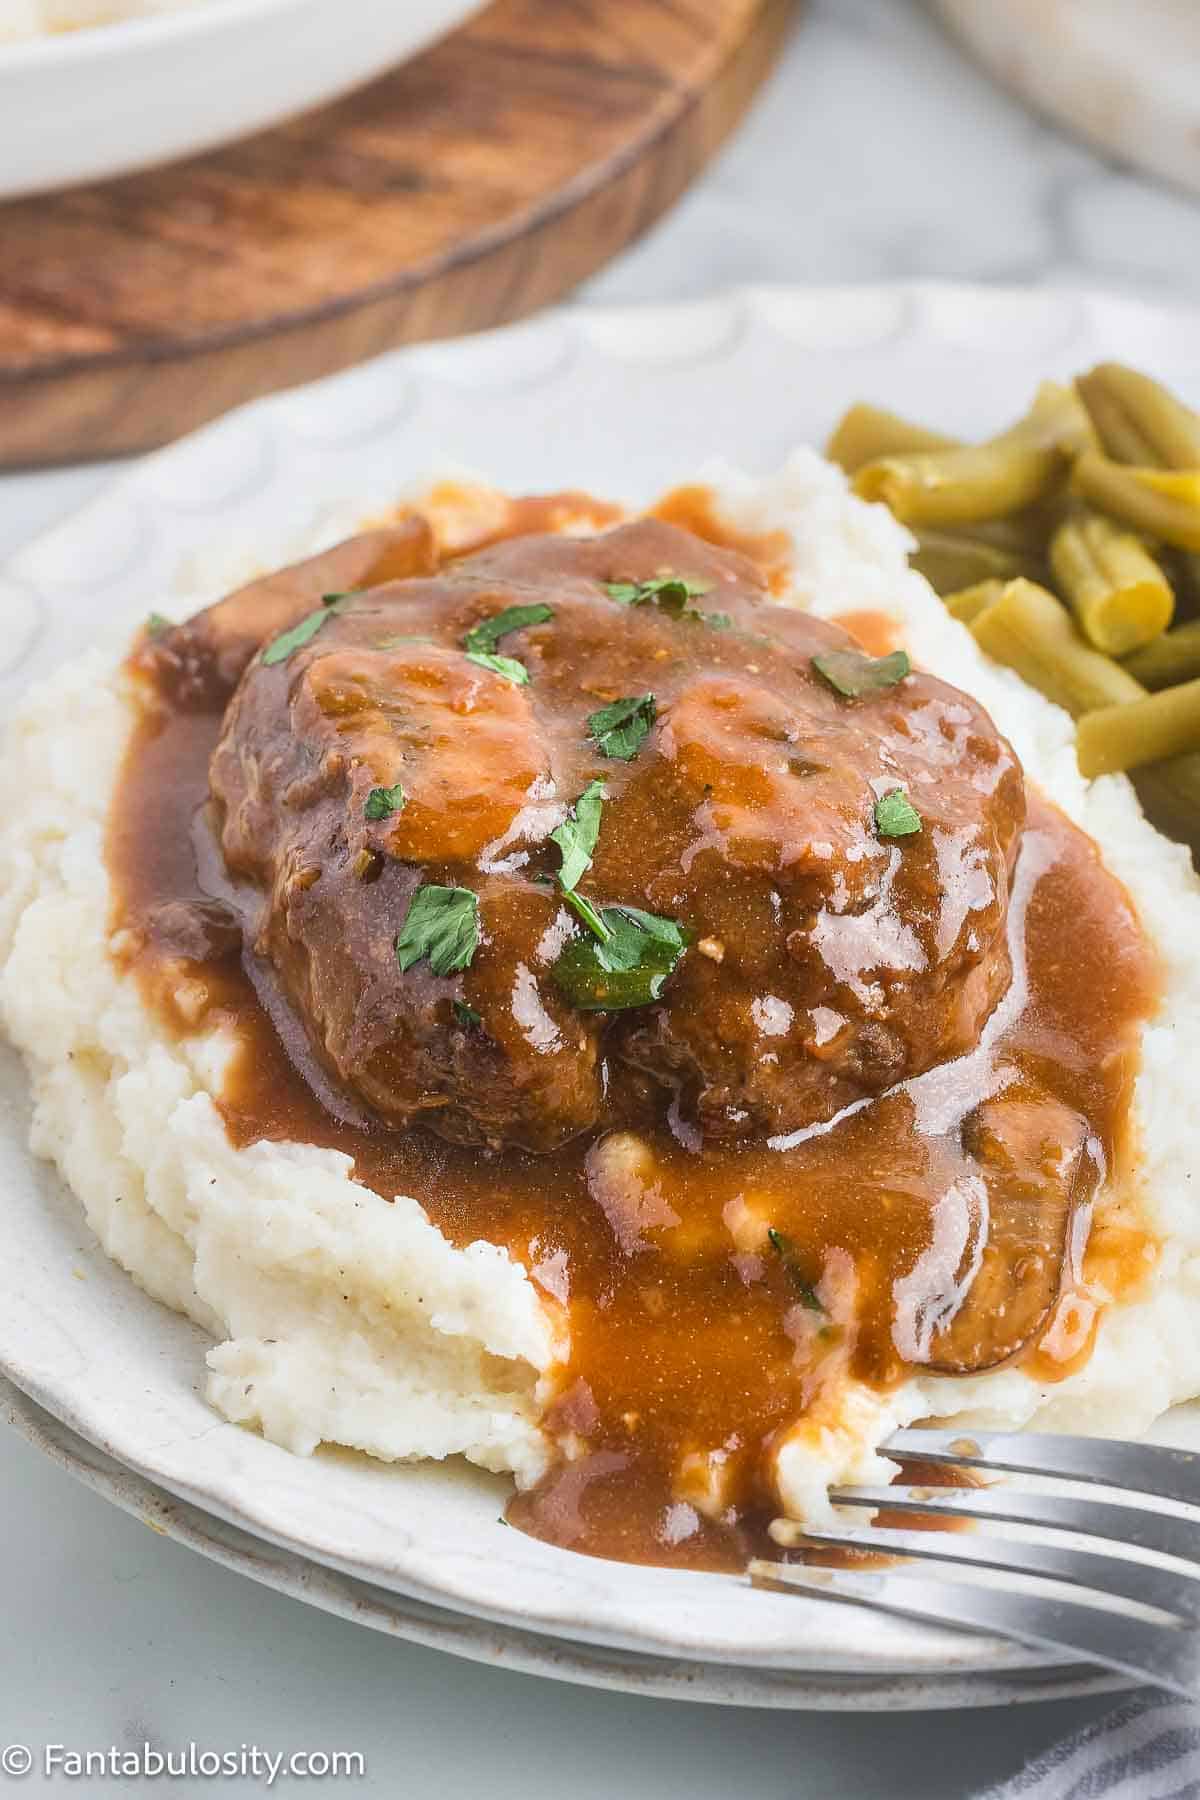 Cooked salisbury steak sitting on top of mashed potatoes, covered in mushroom gravy.